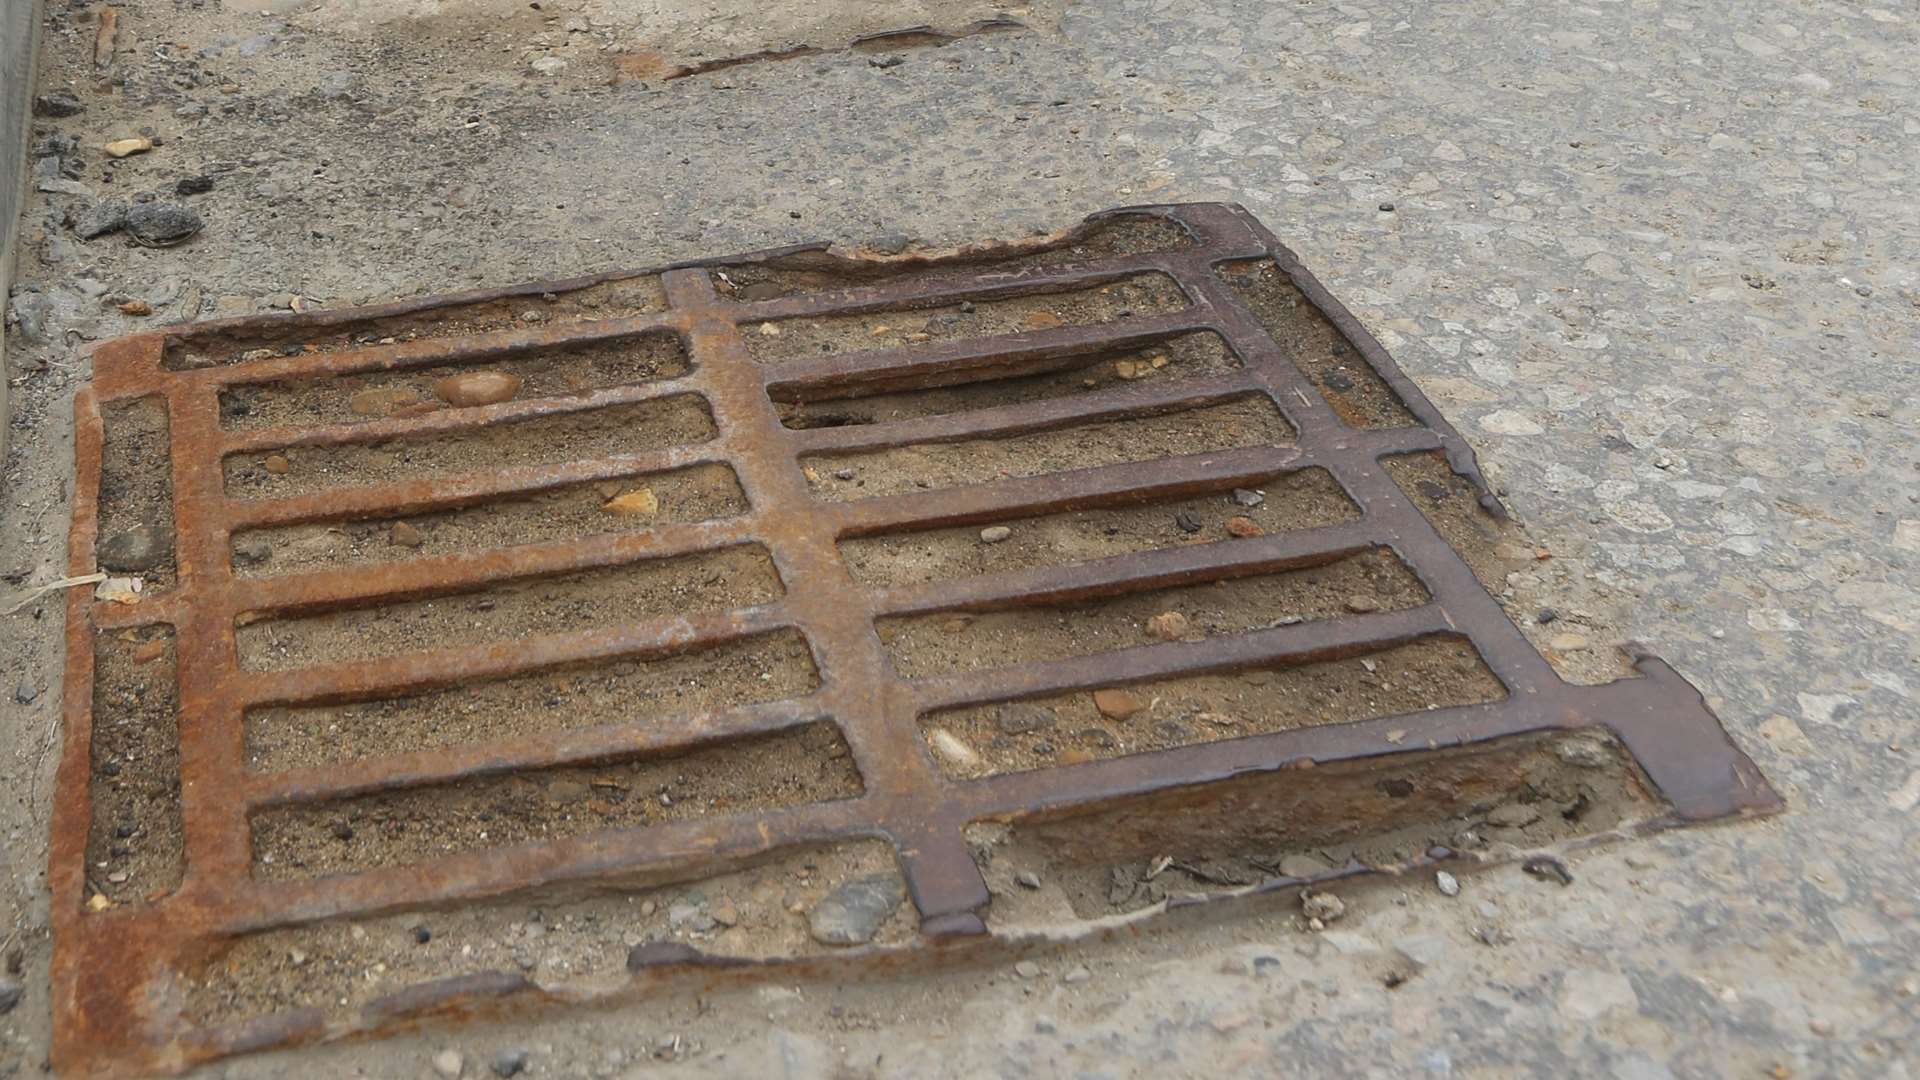 One of the drains Mr Pexton says is blocked with dirt and needs cleaning out. Picture: John Westhrop FM4834349